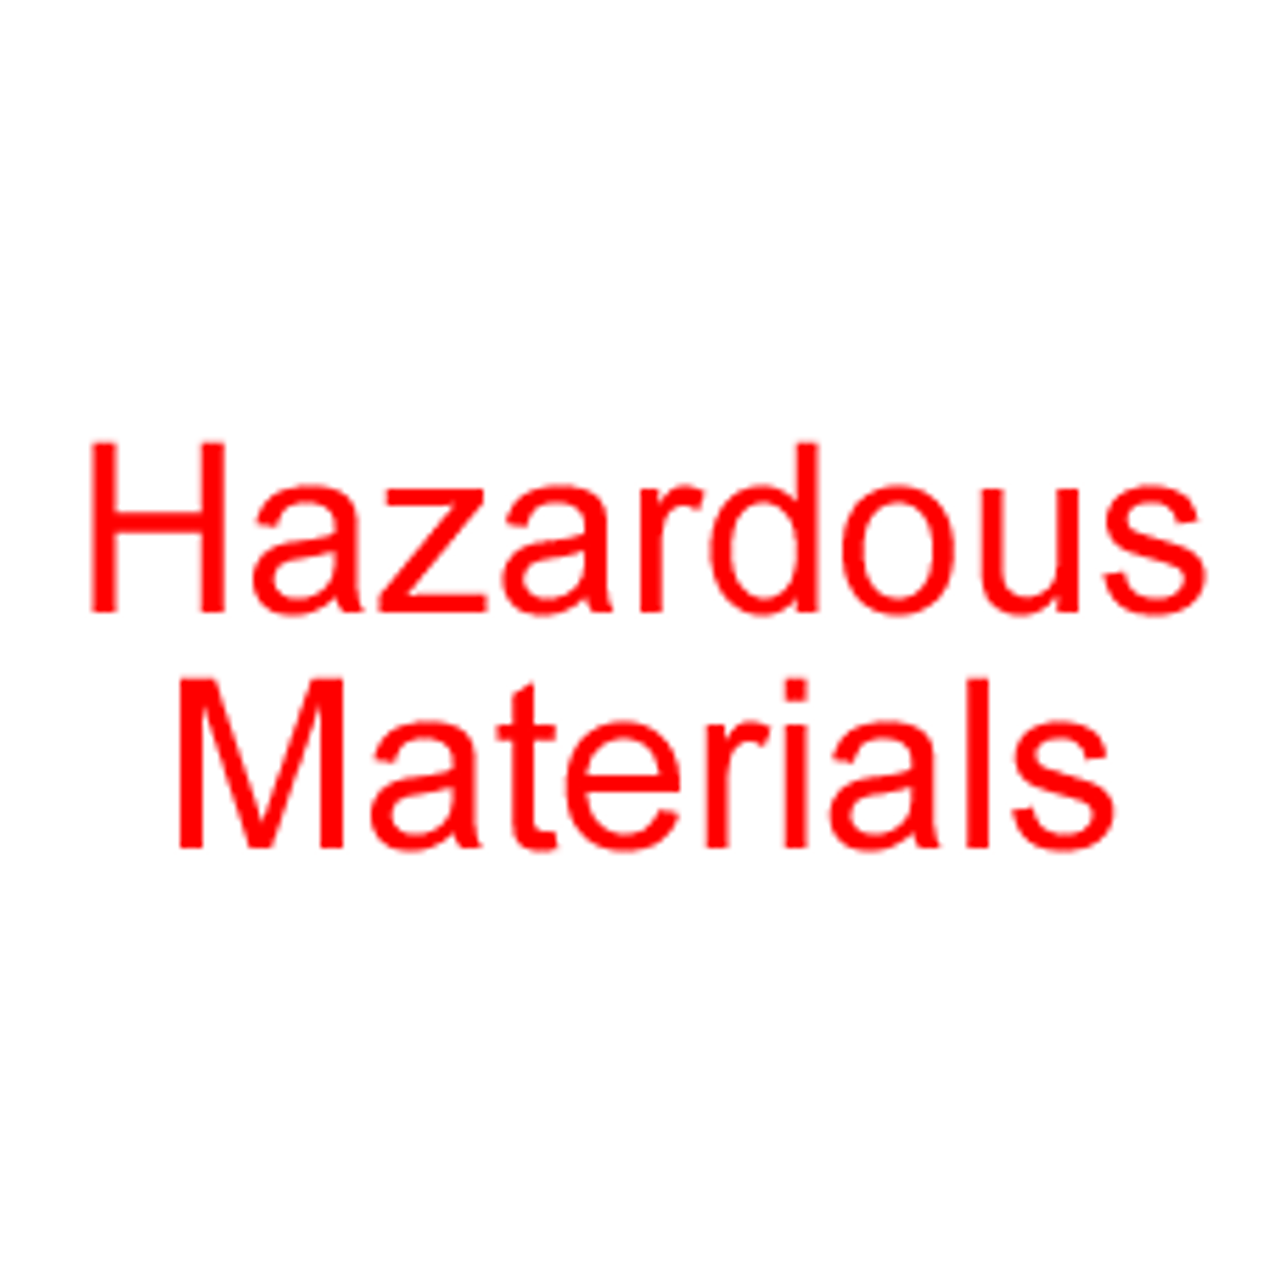 HAZARDOUS MATERIALS Rubber Stamp for mail use self-inking